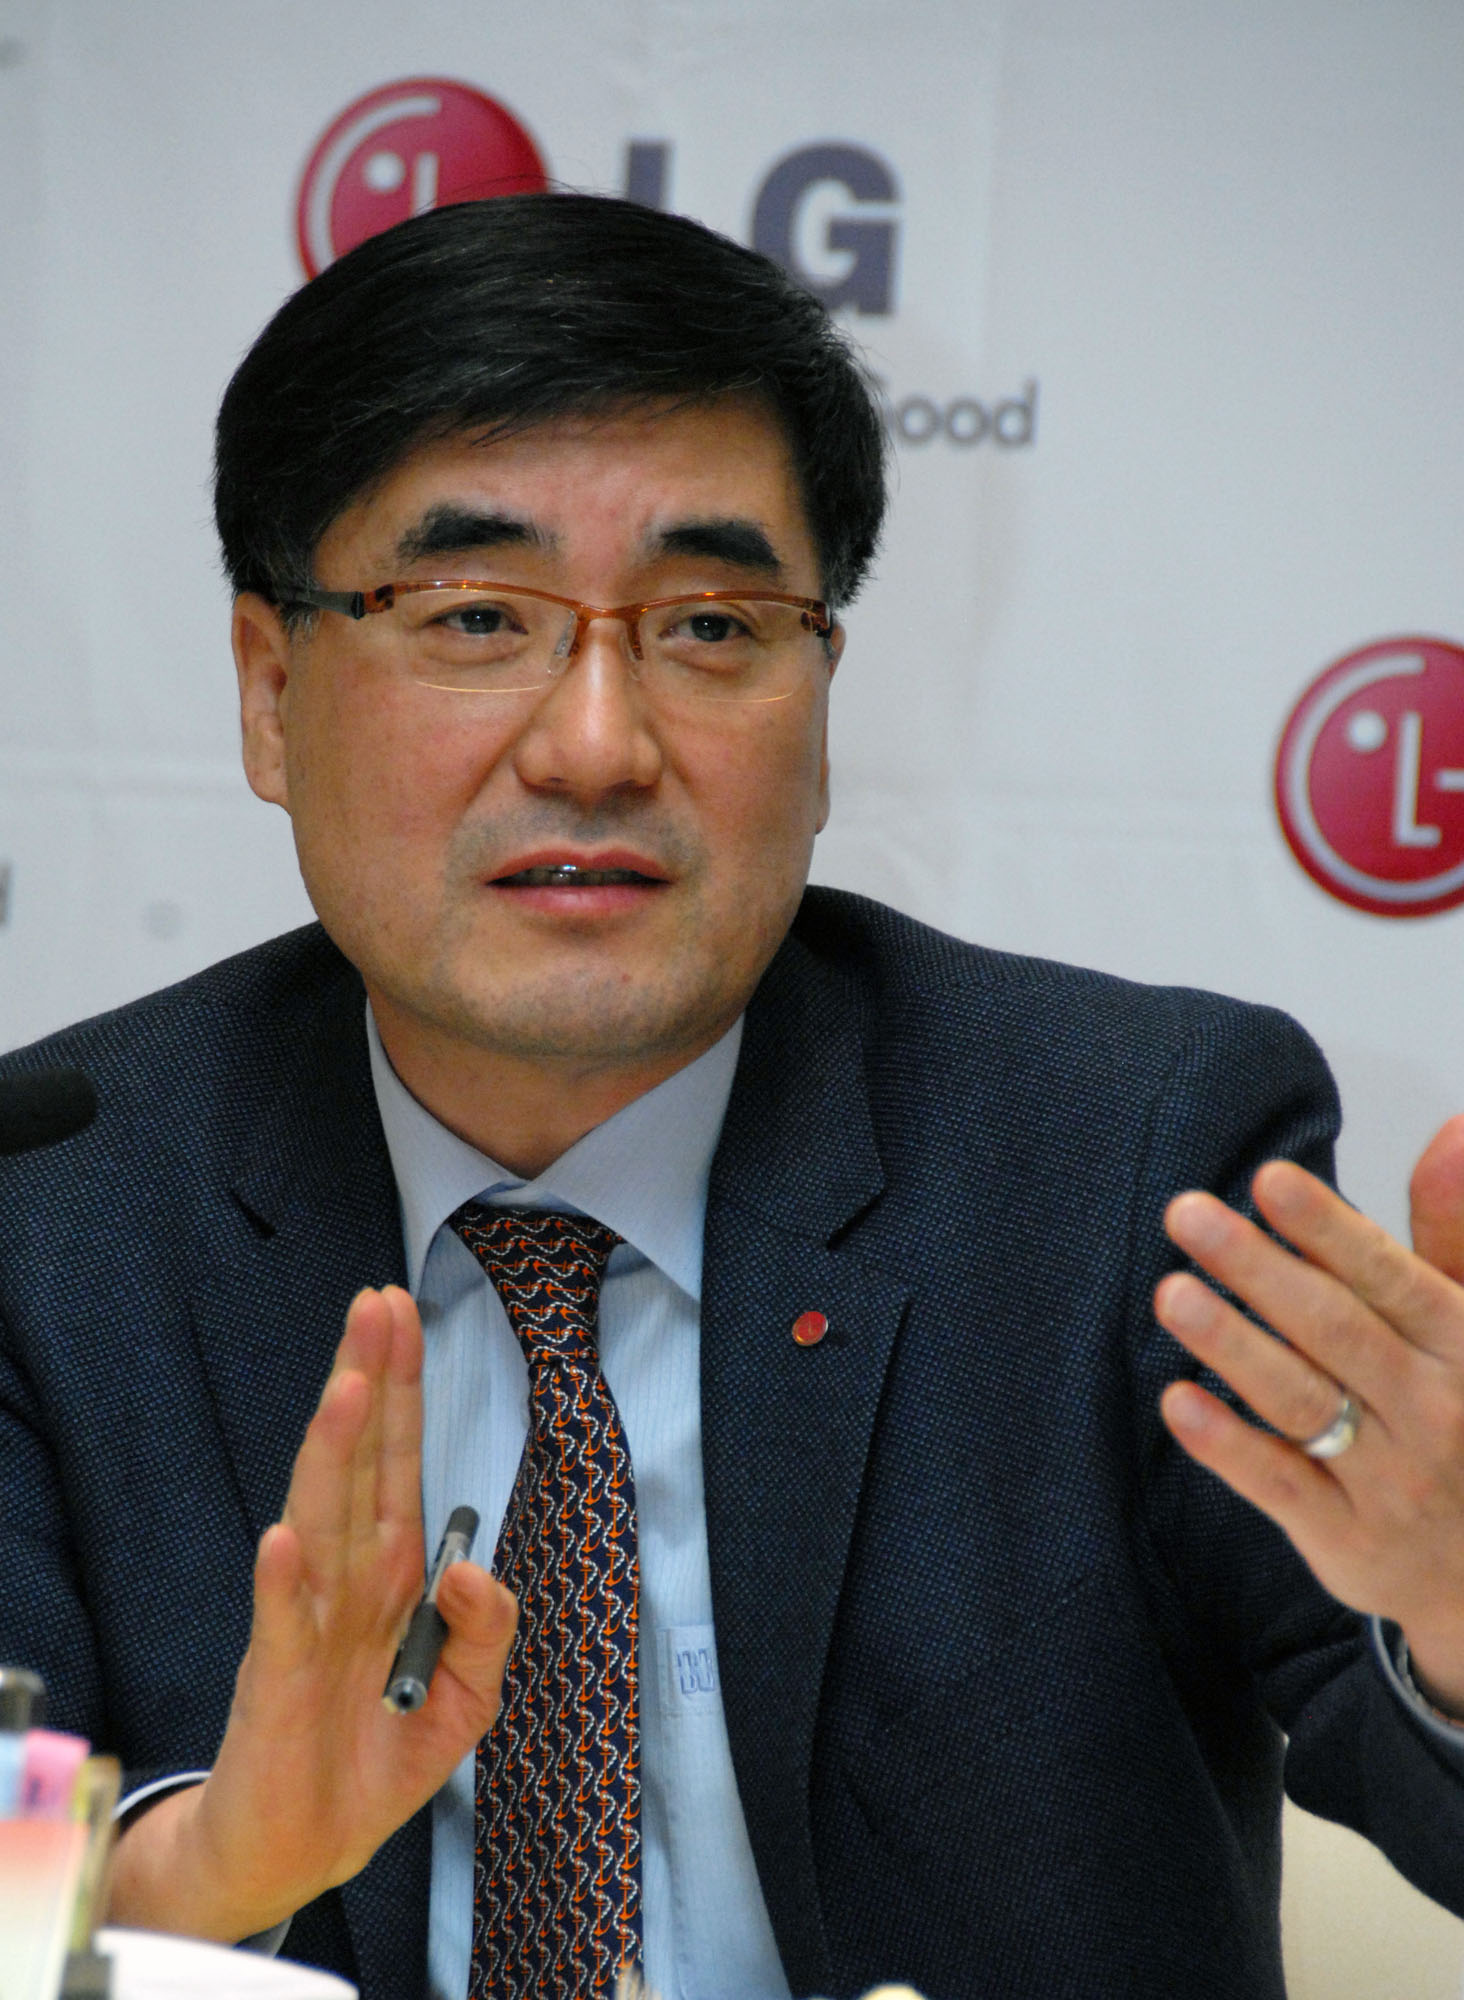 Havis Kwon, president and CEO of the LG Electronics Home Entertainment Company speaking at CES 2013